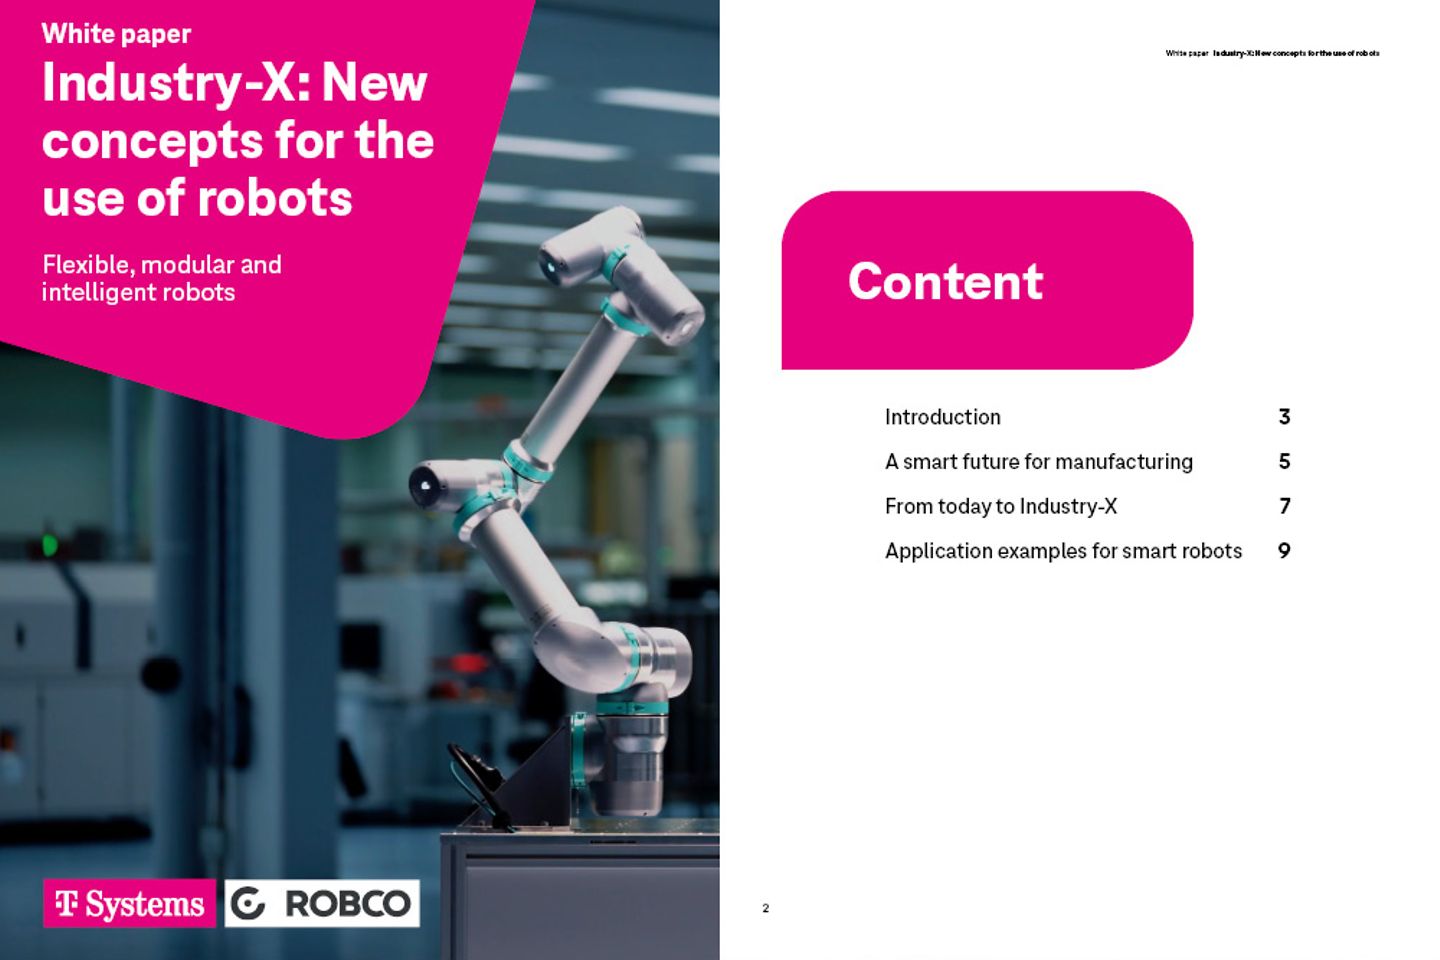 Preview: New approaches to robotic applications